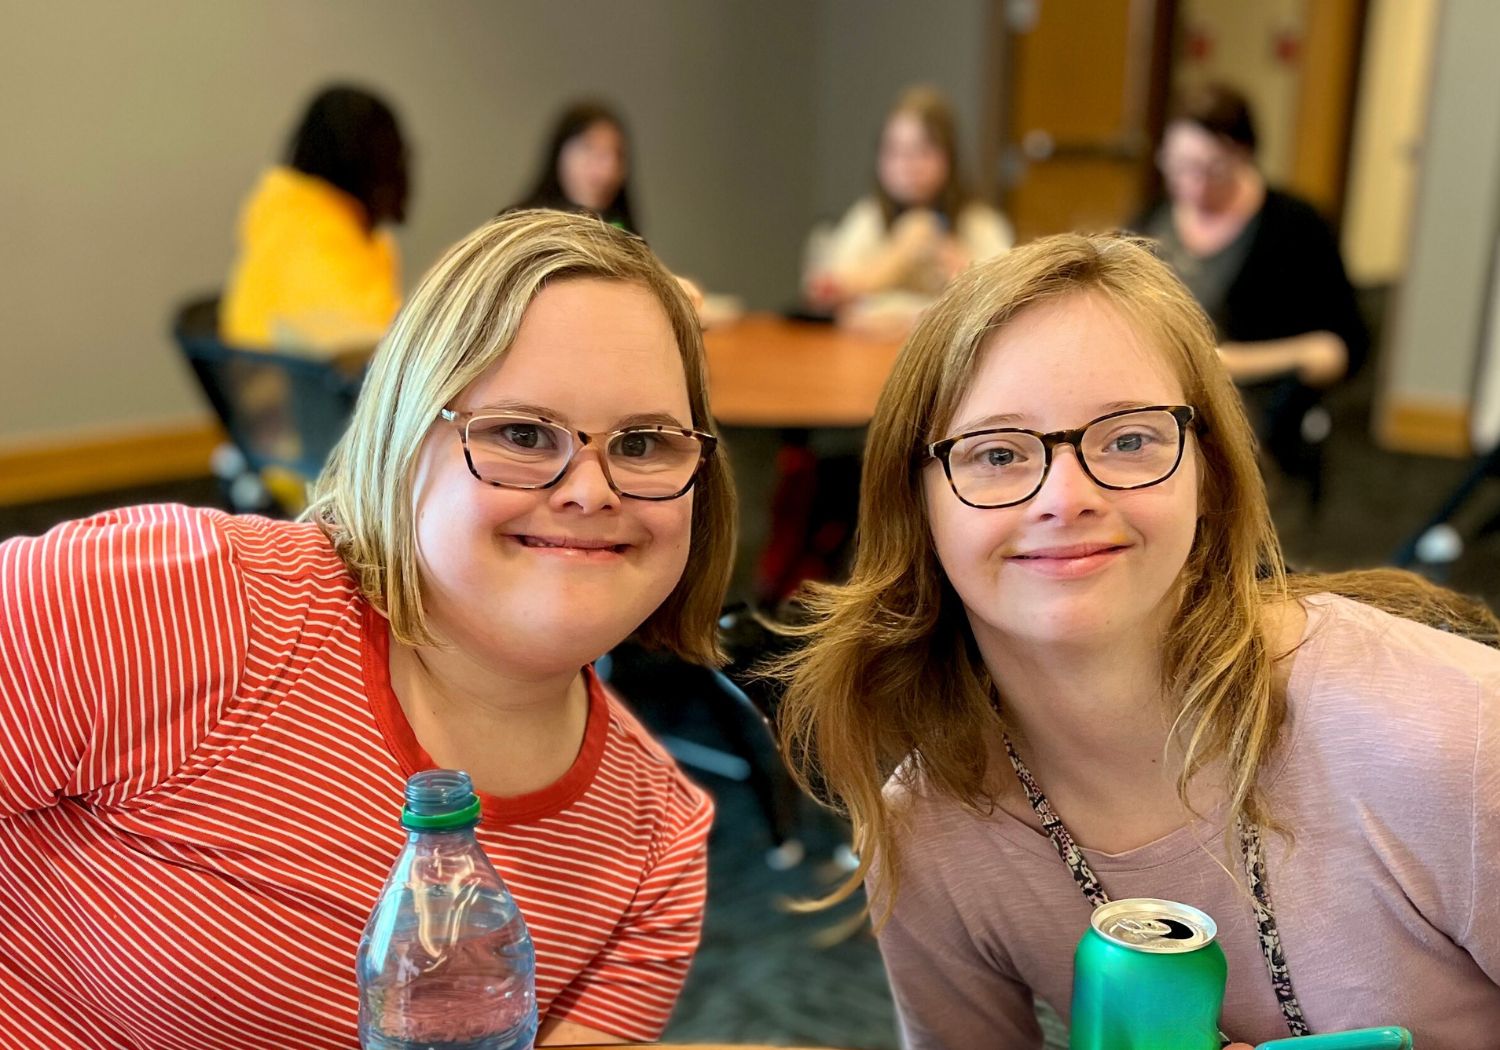 Two neurodiverse female students smiling